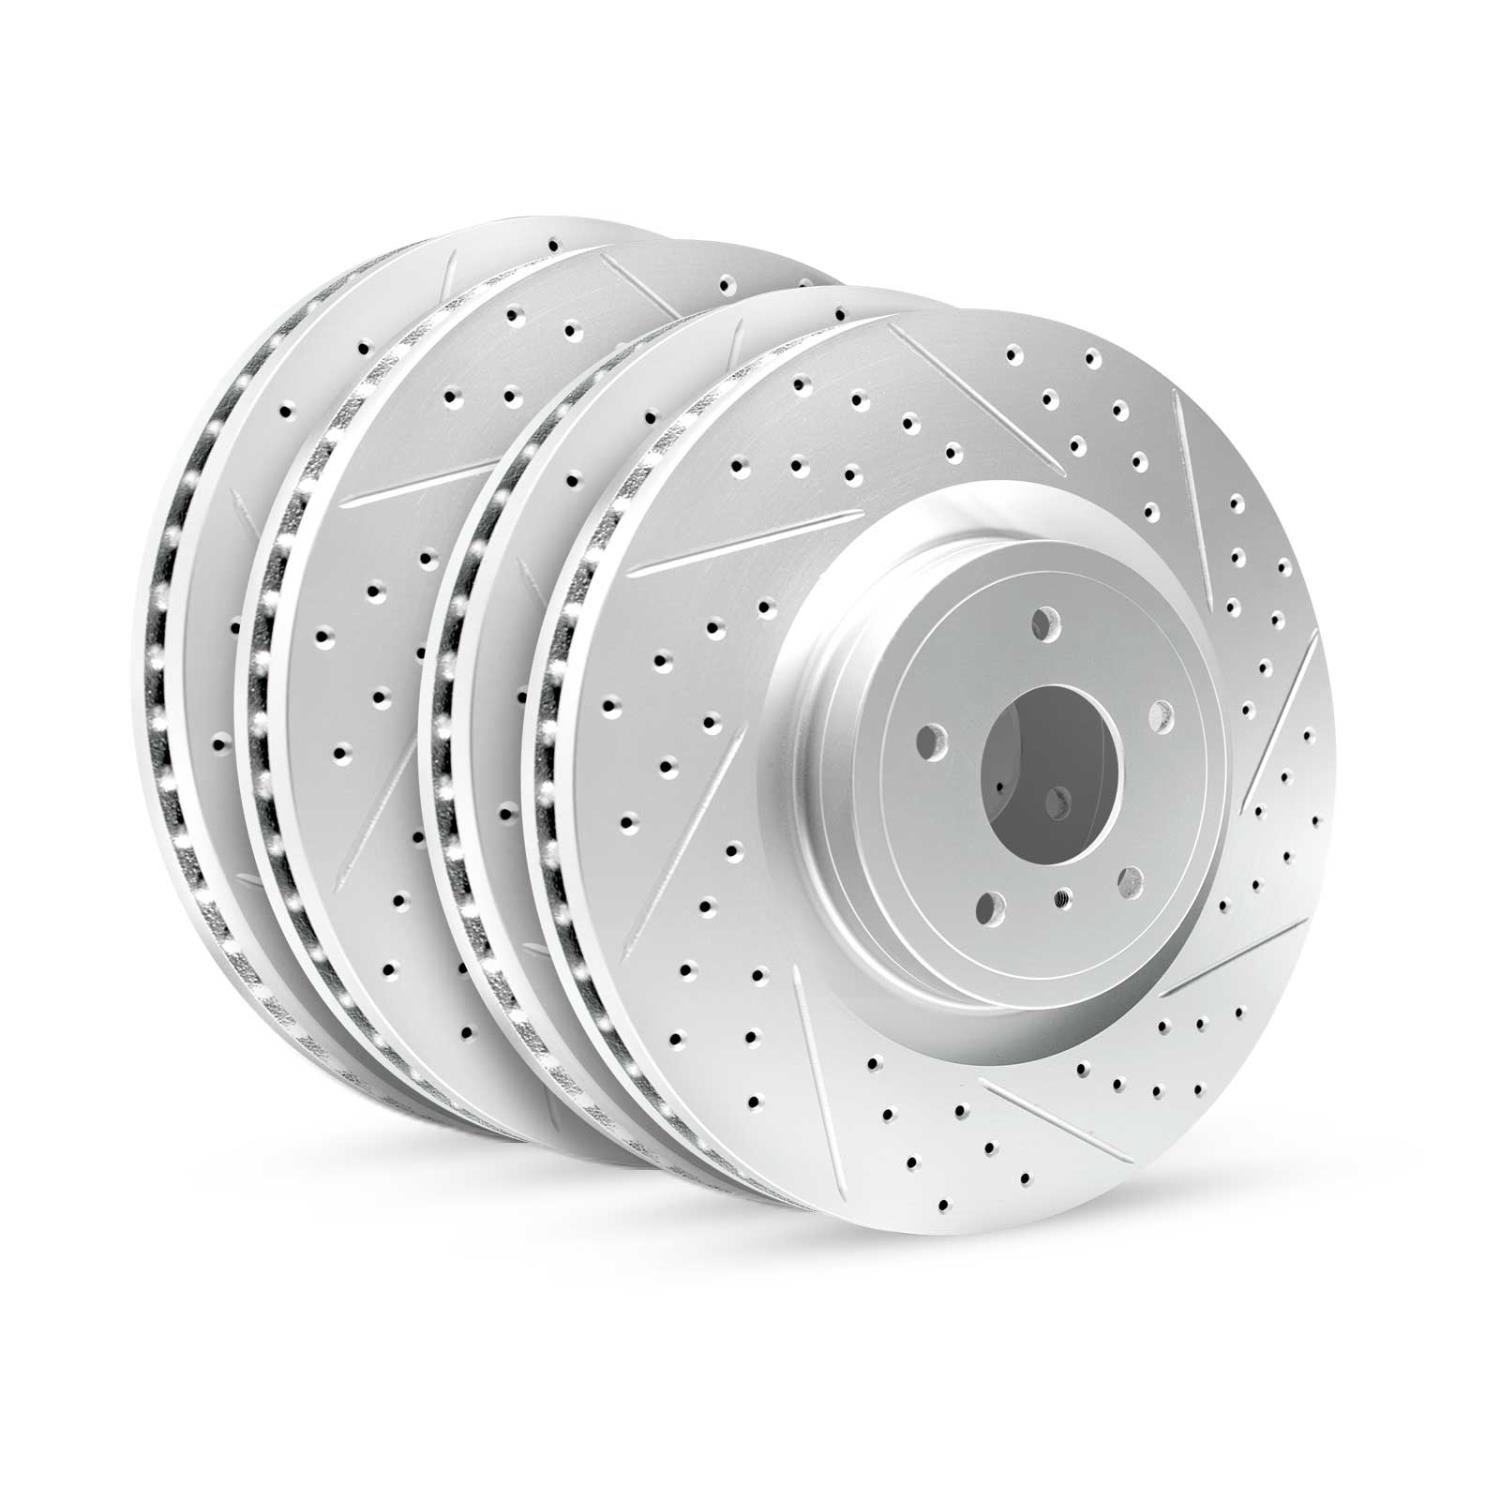 GEO-Carbon Drilled/Slotted Rotors, Fits Select GM, Position: Front/Rear